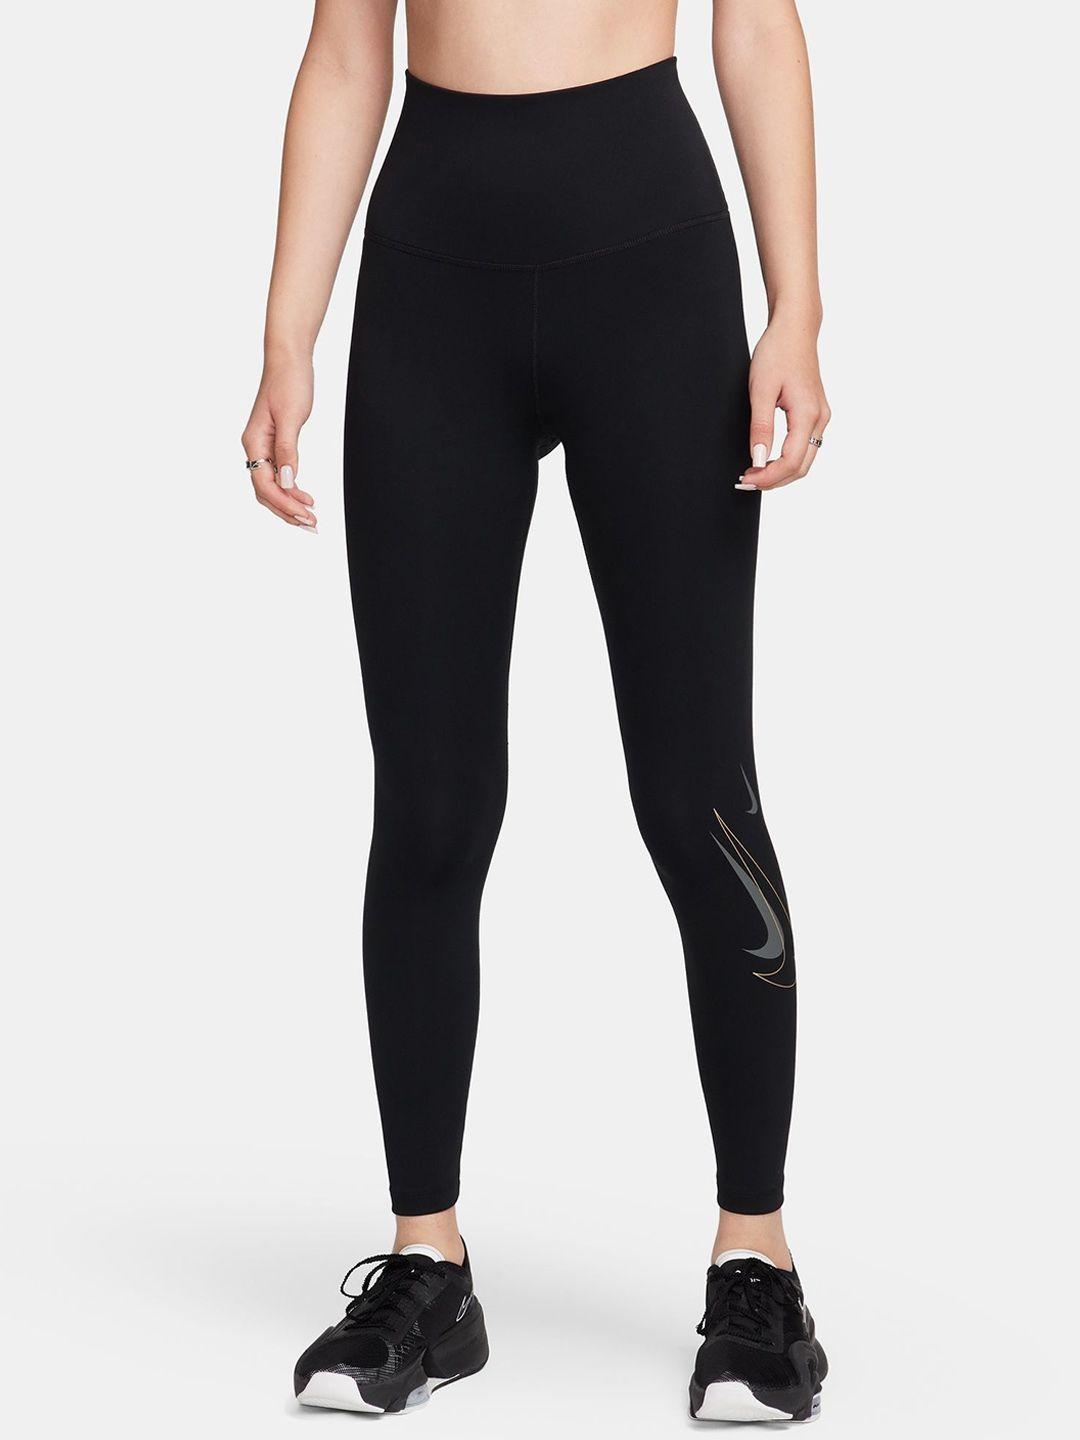 nike-one-women-high-waisted-slim-fit-dri-fit-ankle-length-gym-tights